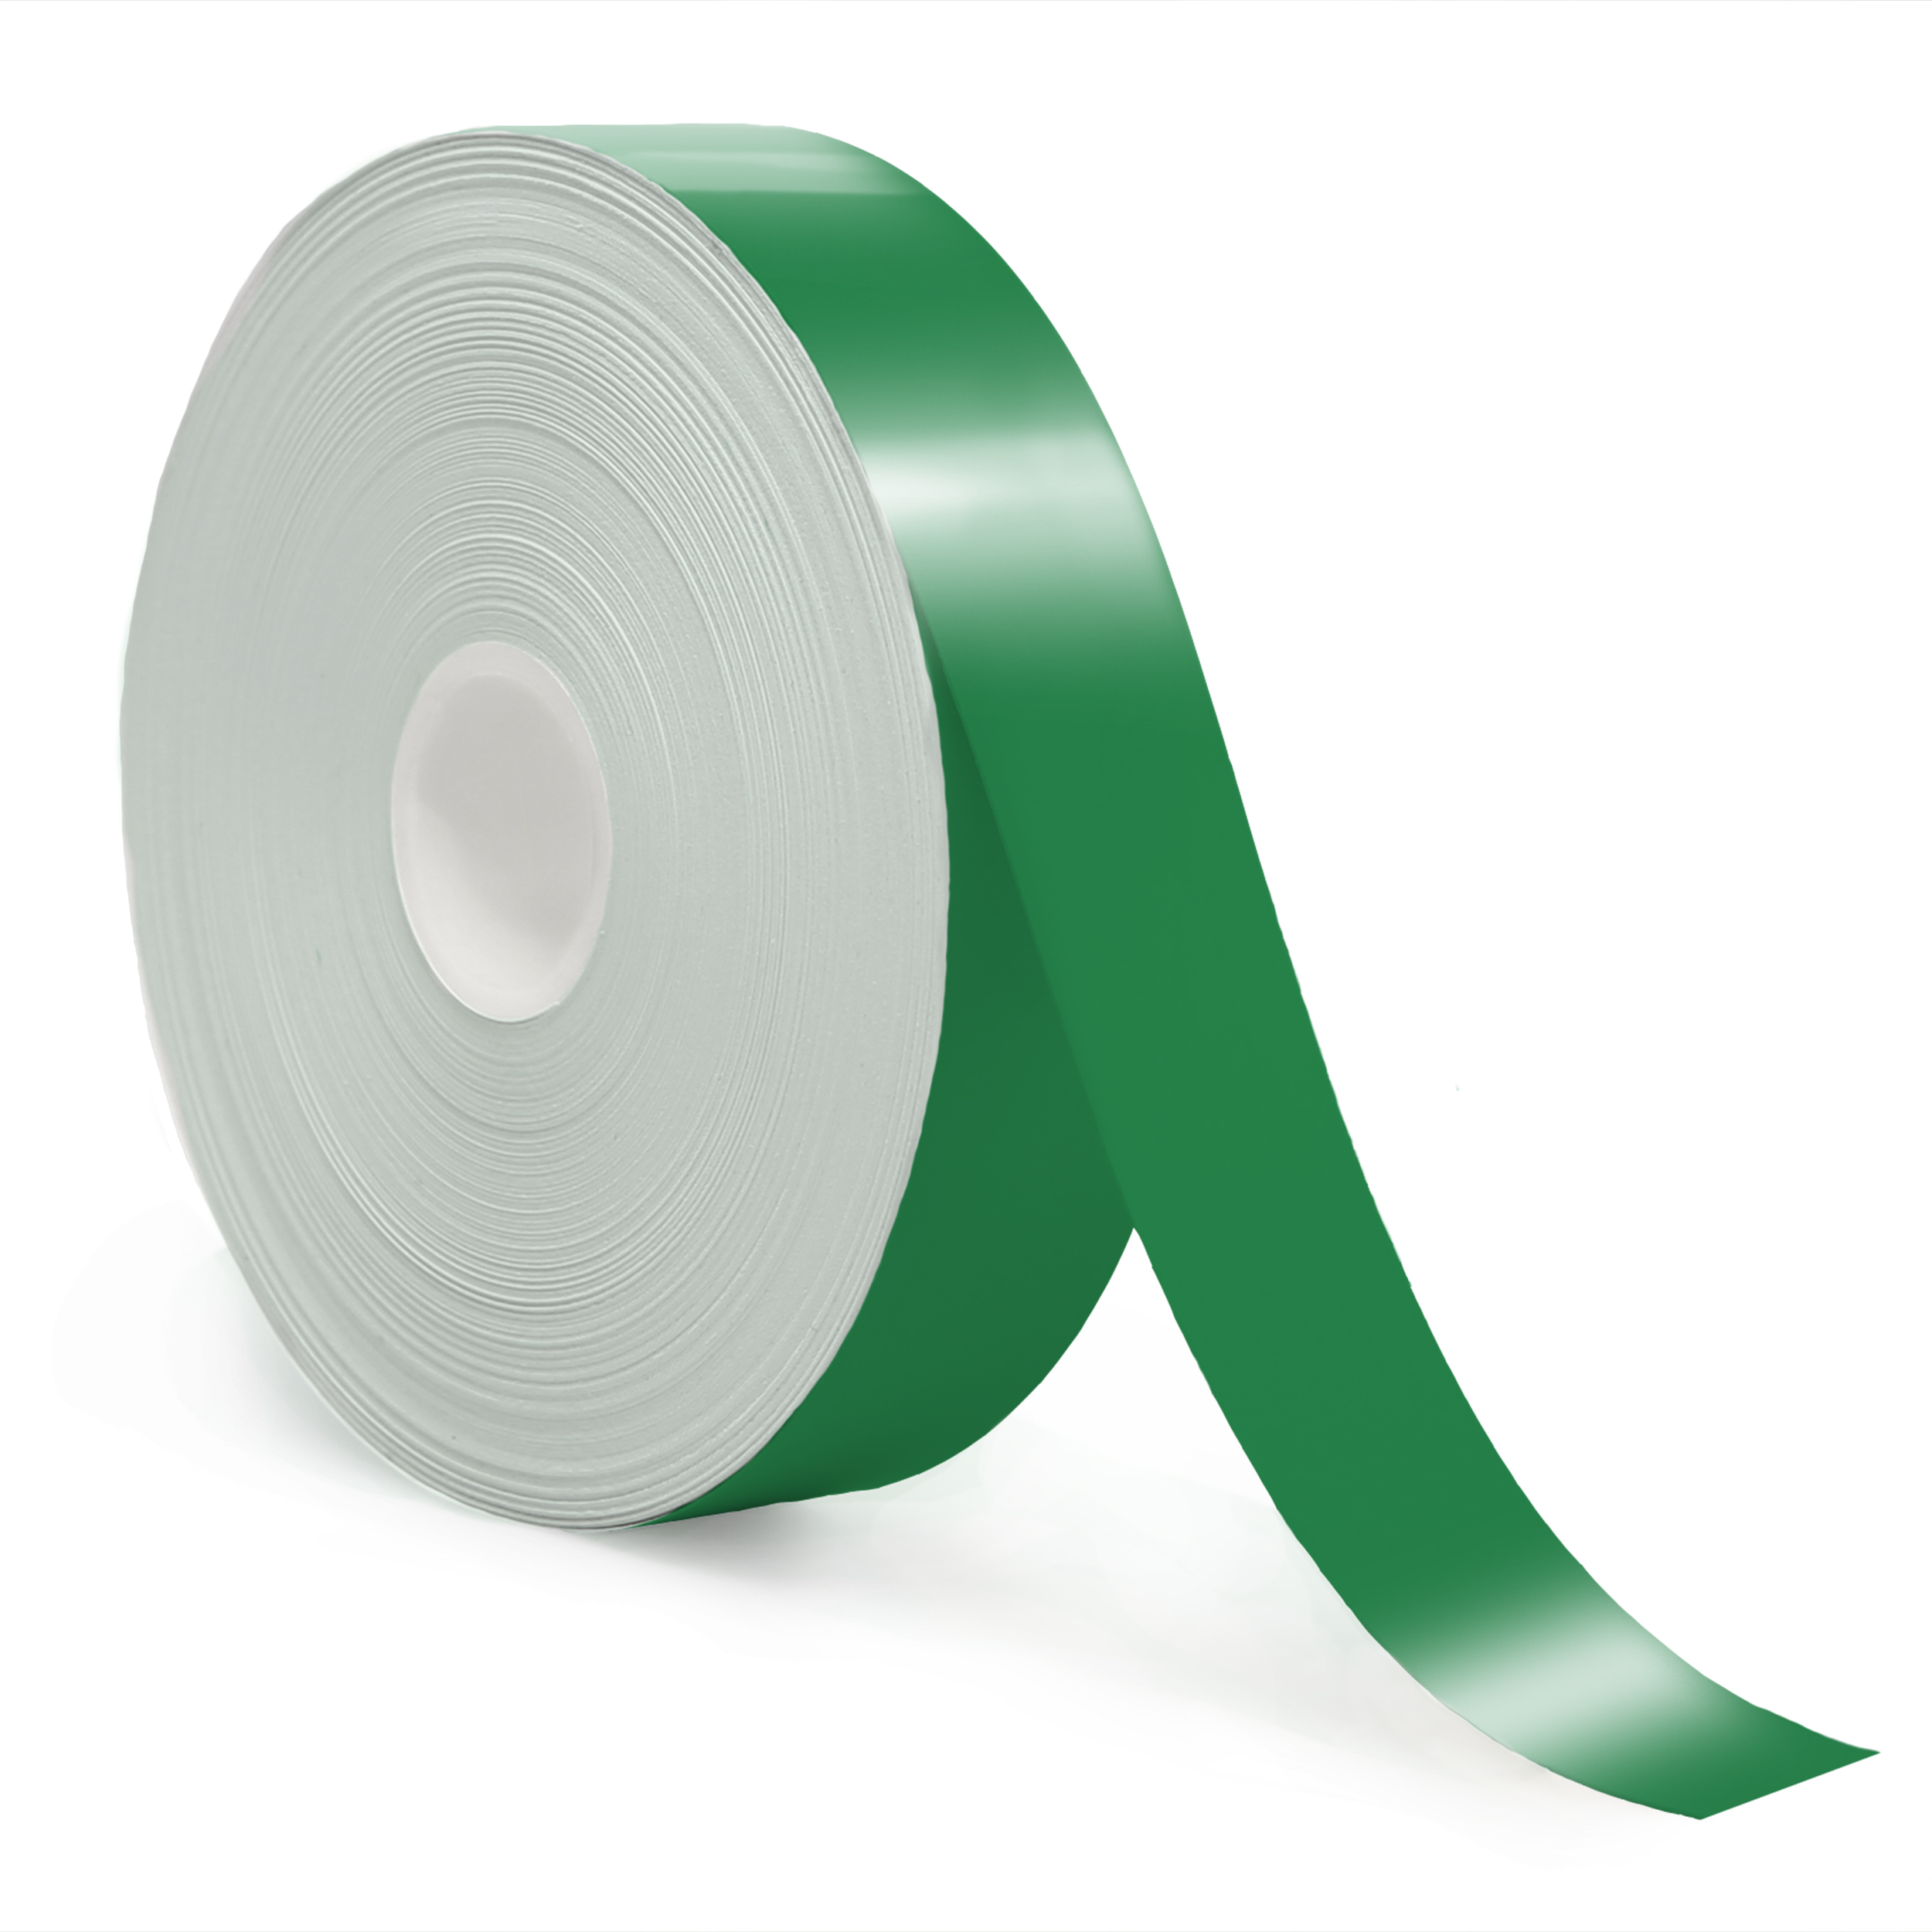 Detail view for 1" x 70ft Green Reflective Vinyl Tape